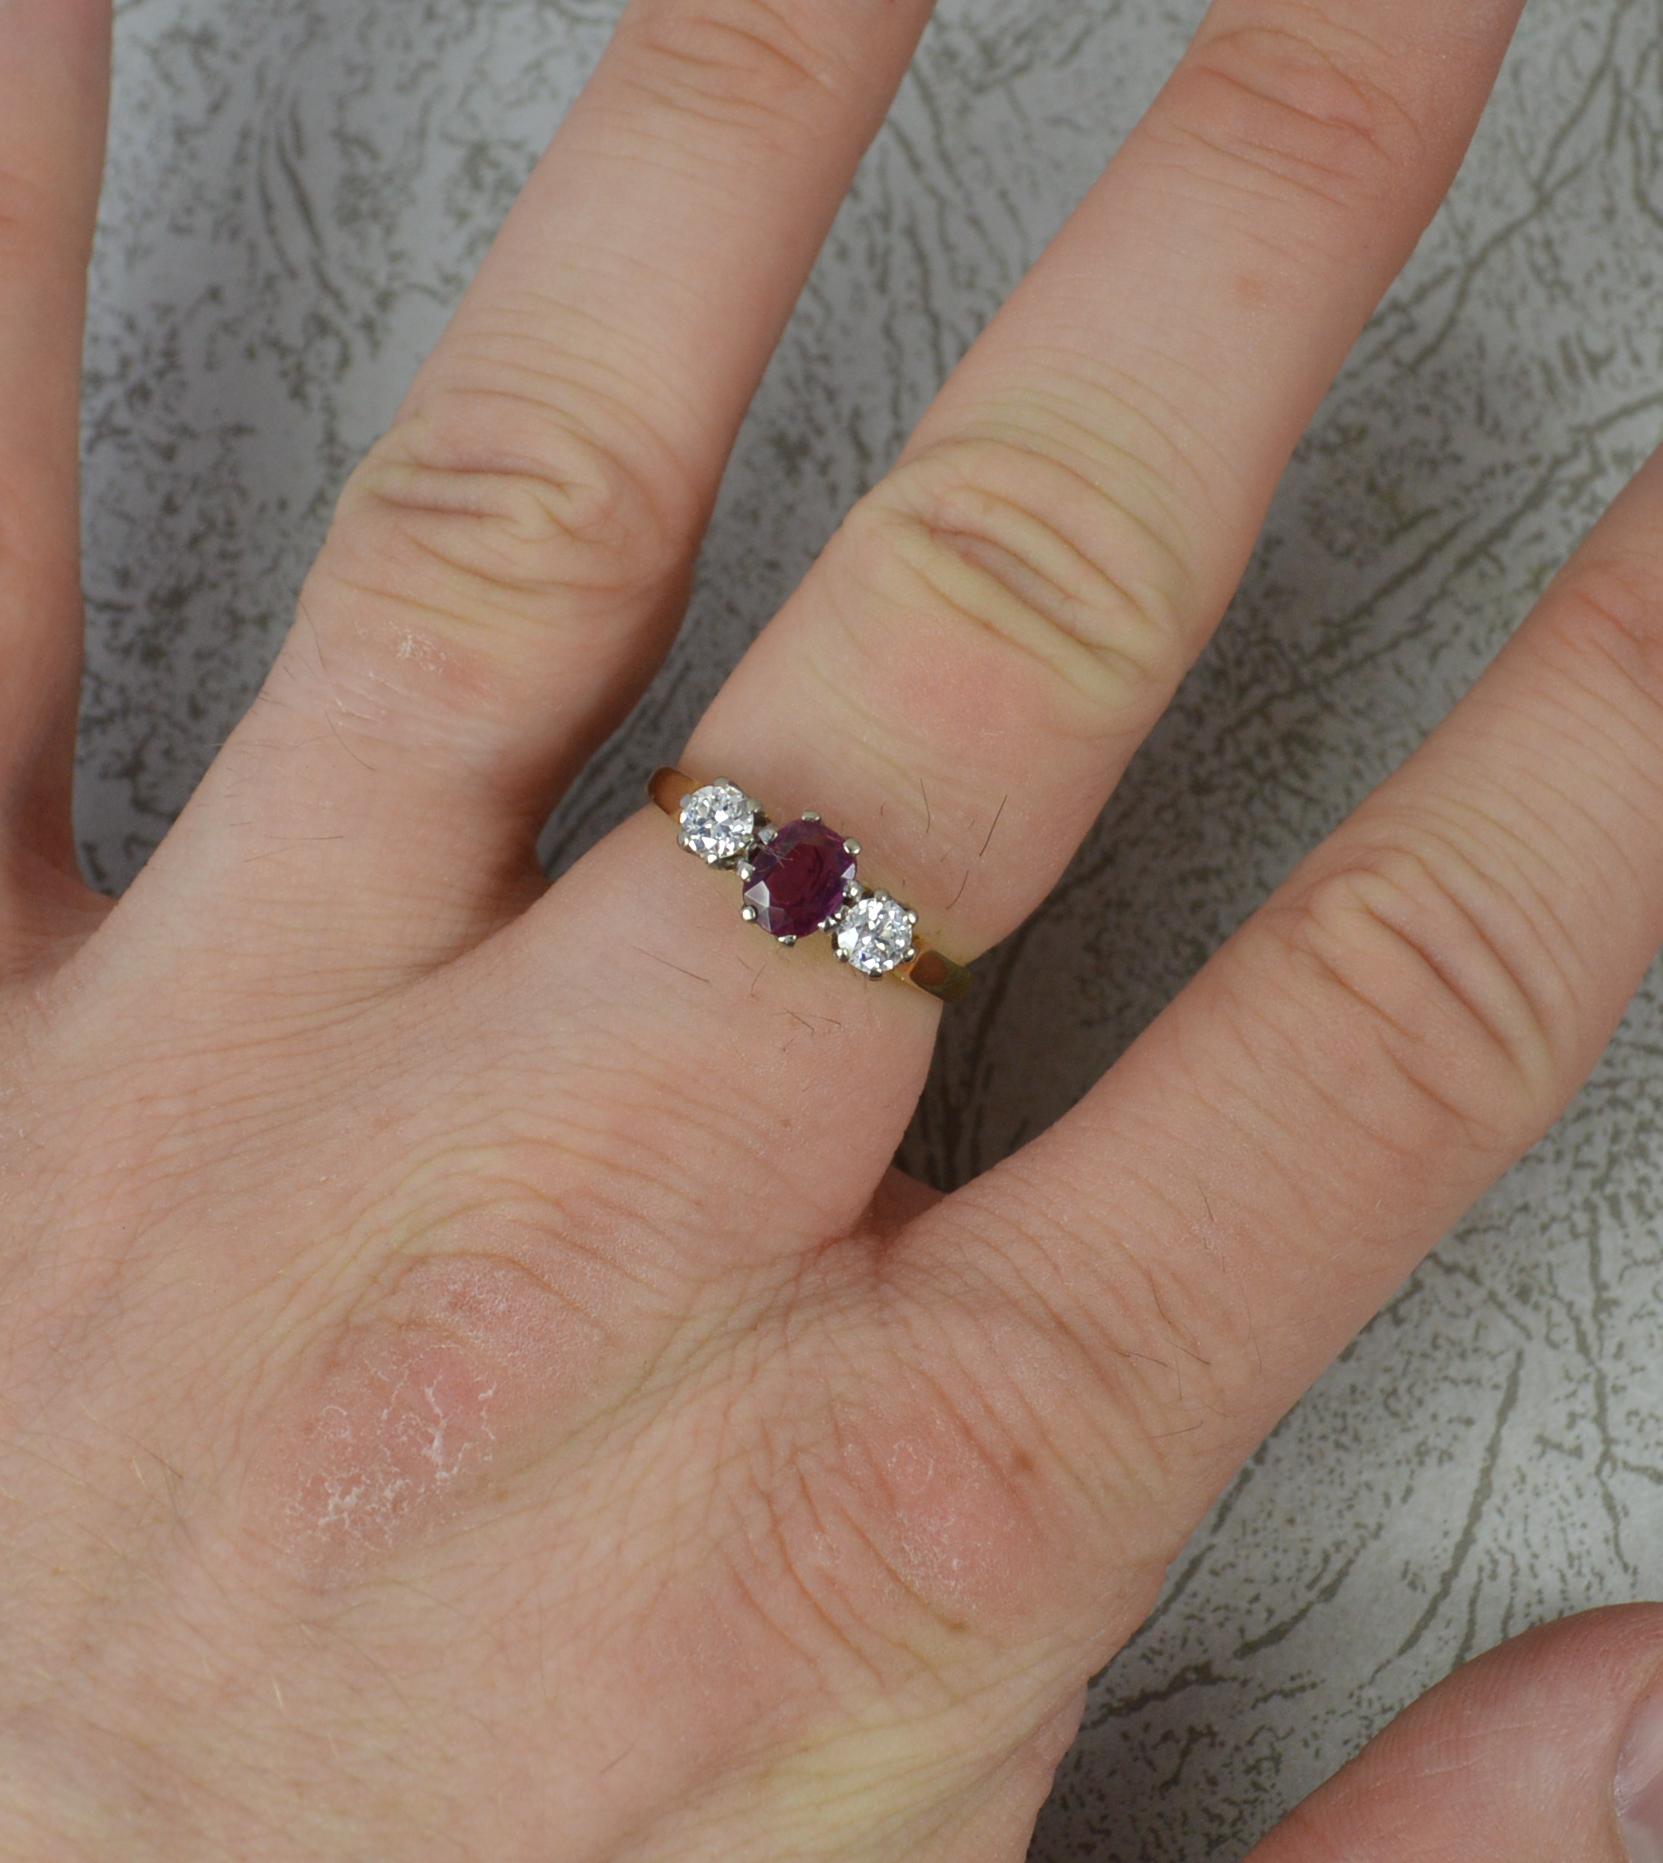 A ruby and diamond trilogy ring.
Solid 18 carat yellow gold example with platinum head setting.
Designed with a natural oval cut ruby gemstone to centre. High quality, likely untreated. 4.5mm x 5.7mm. To each side is a natural round brilliant cut